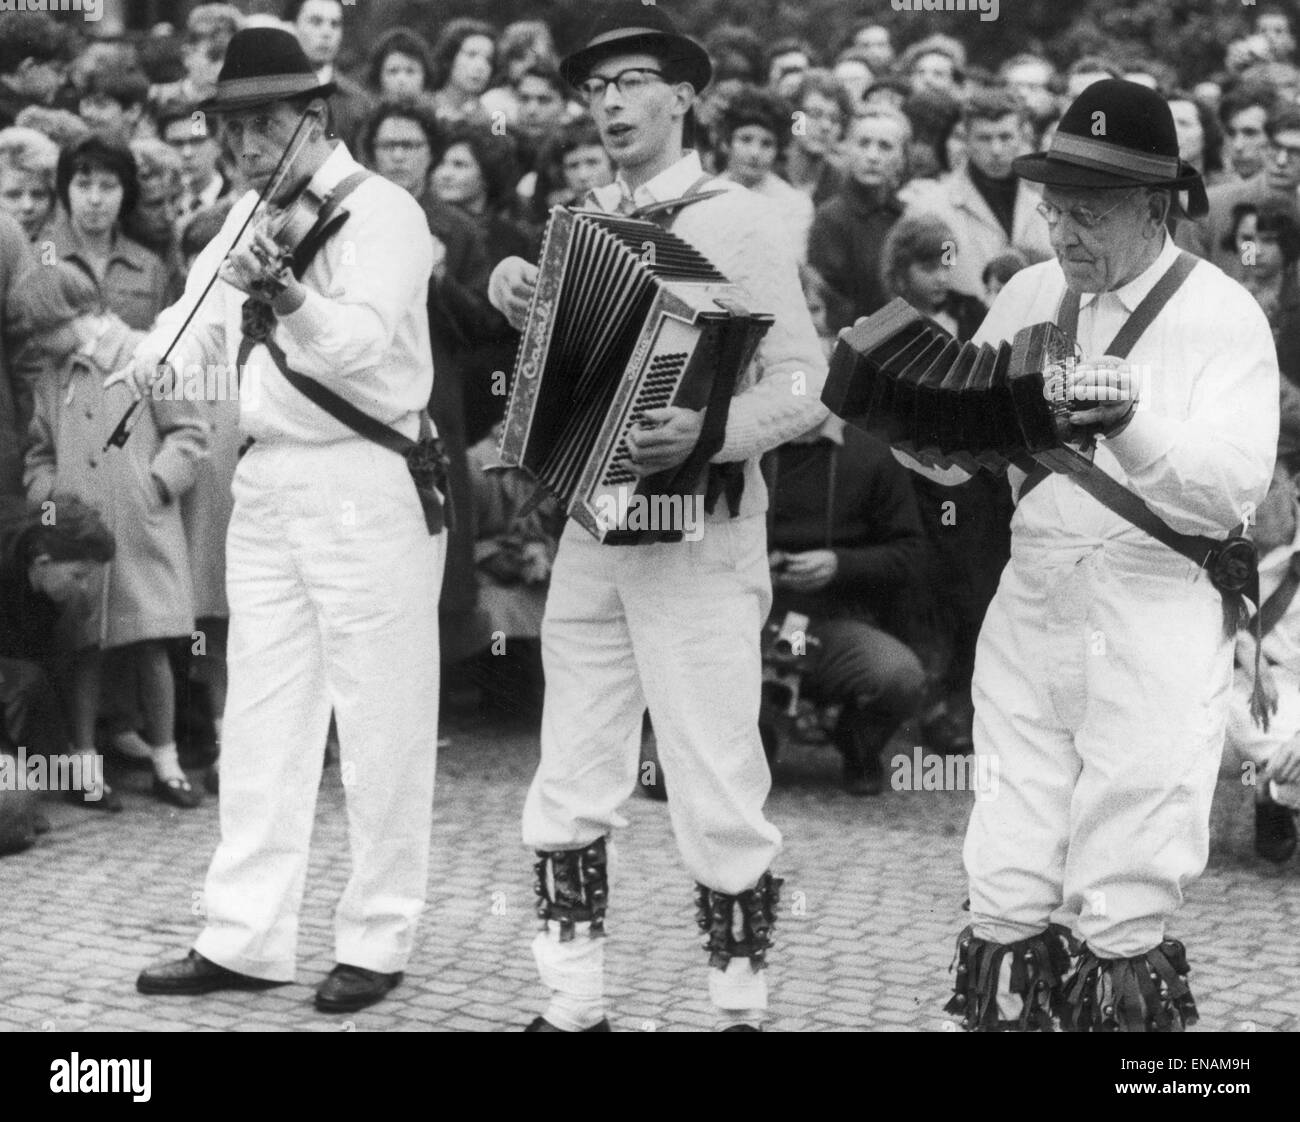 FILE PHOTOS: Oxford, Oxfordshire, UK. 1st May, 1961. Oxford May Morning. Musicians in 1961 working hard to back up Morris dancers for the May Morning festivities. May Day. Oxford Mail/Alamy Features . Stock Photo